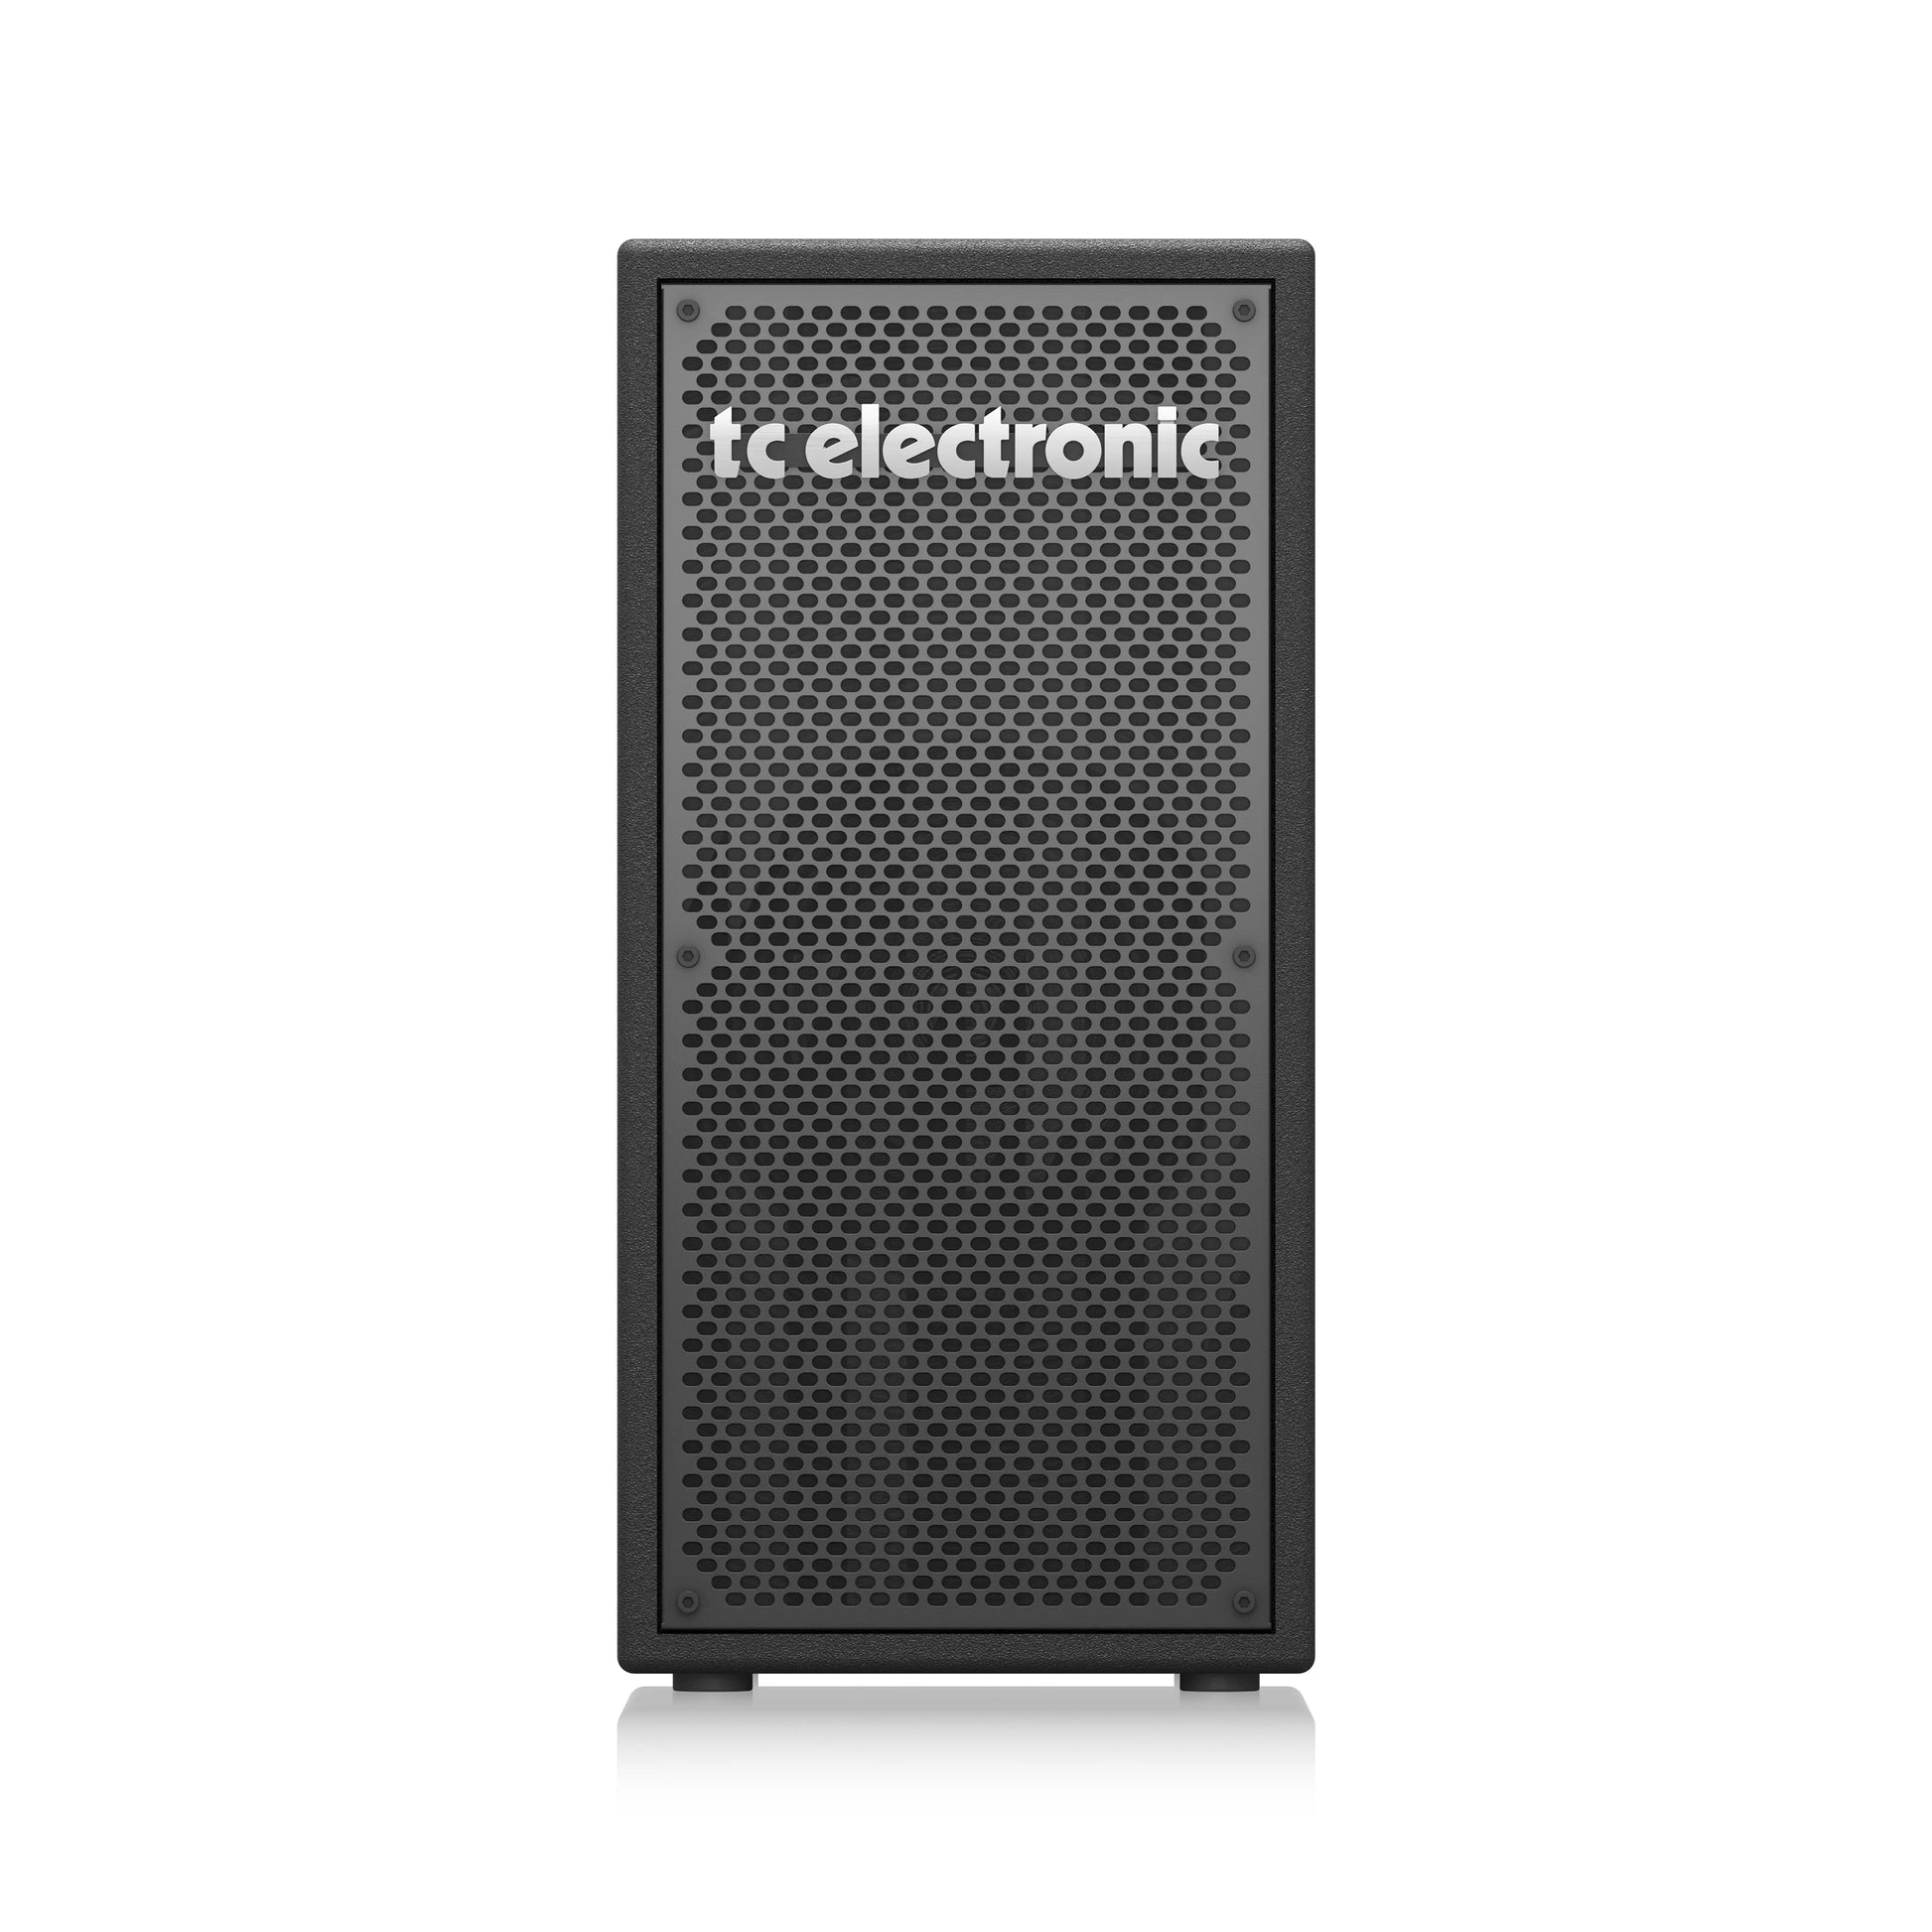 Amplifier TC Electronic BC208 Vertical, Cabinet - Việt Music